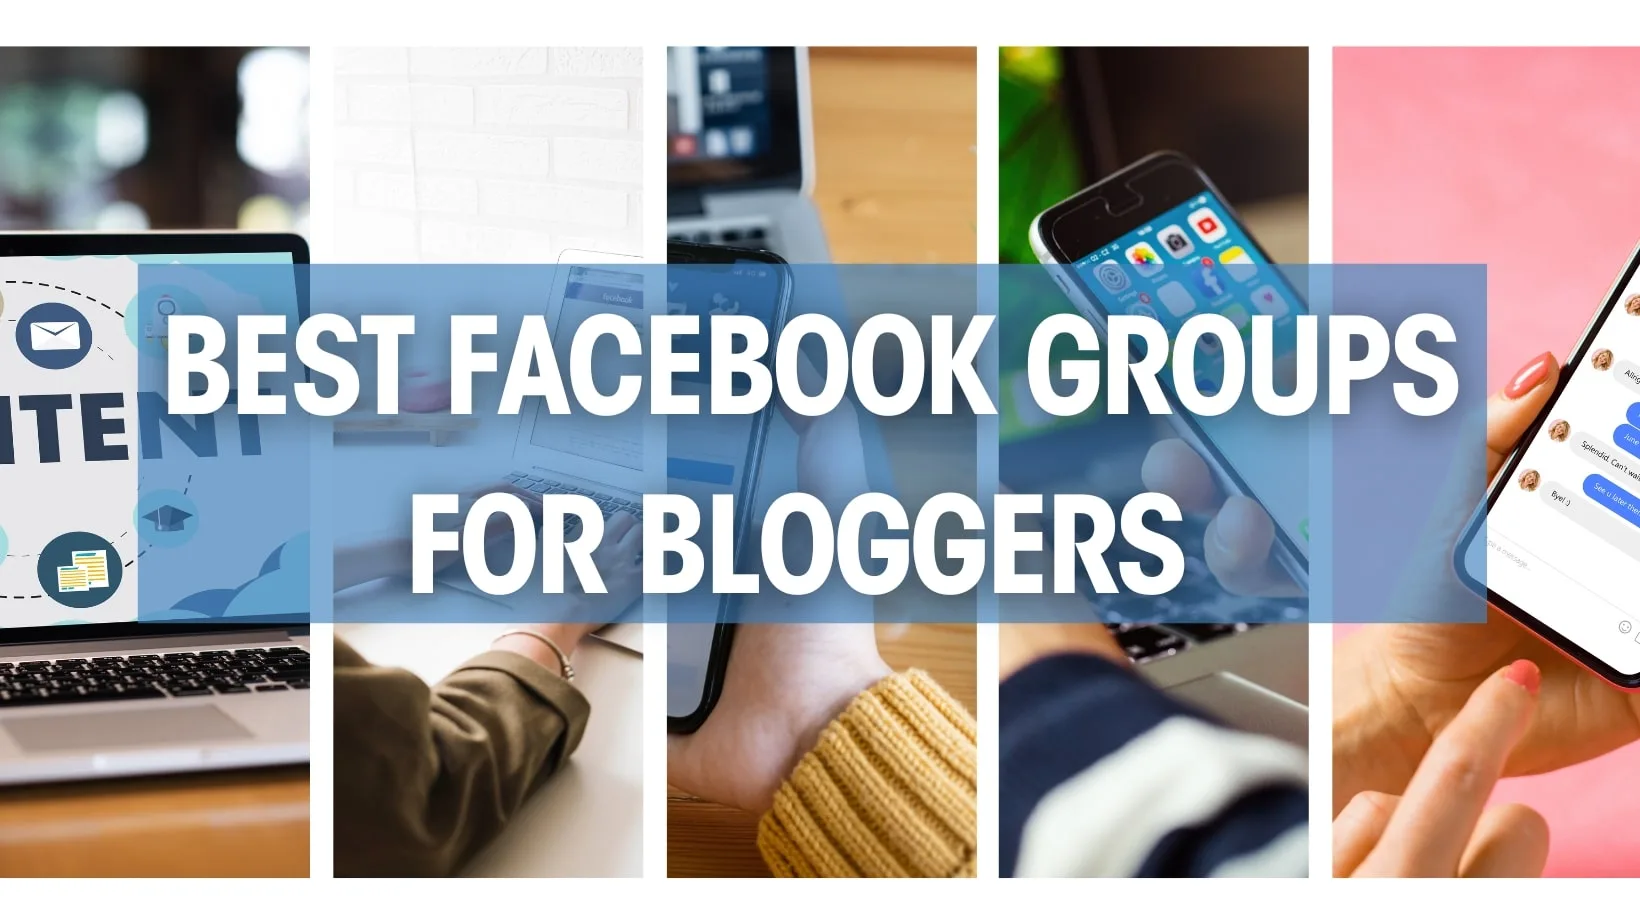 5 Best Facebook Groups for Bloggers